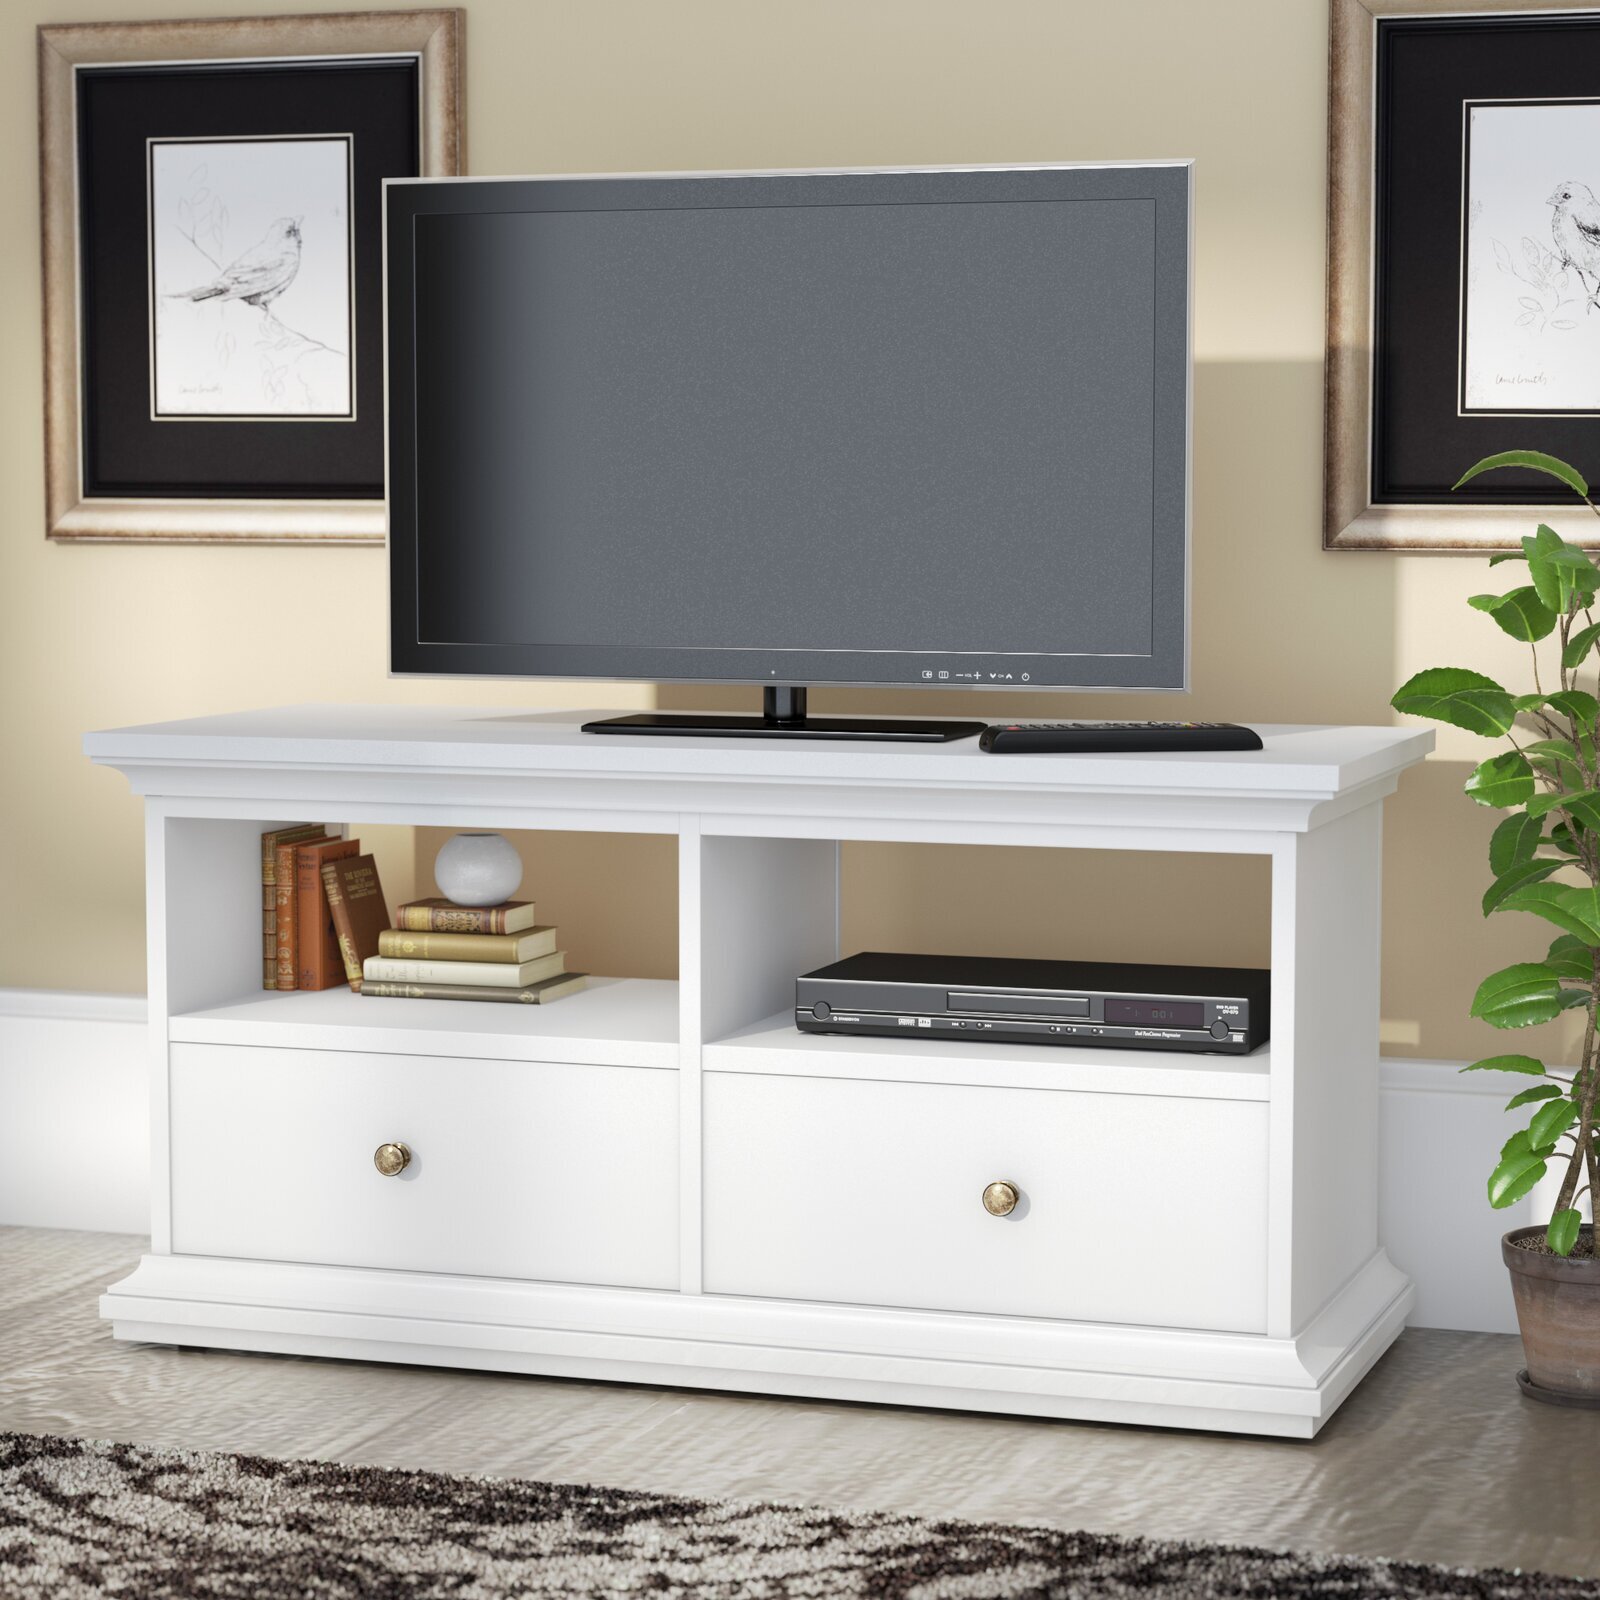 Farmhouse style low tv stand for flat screens